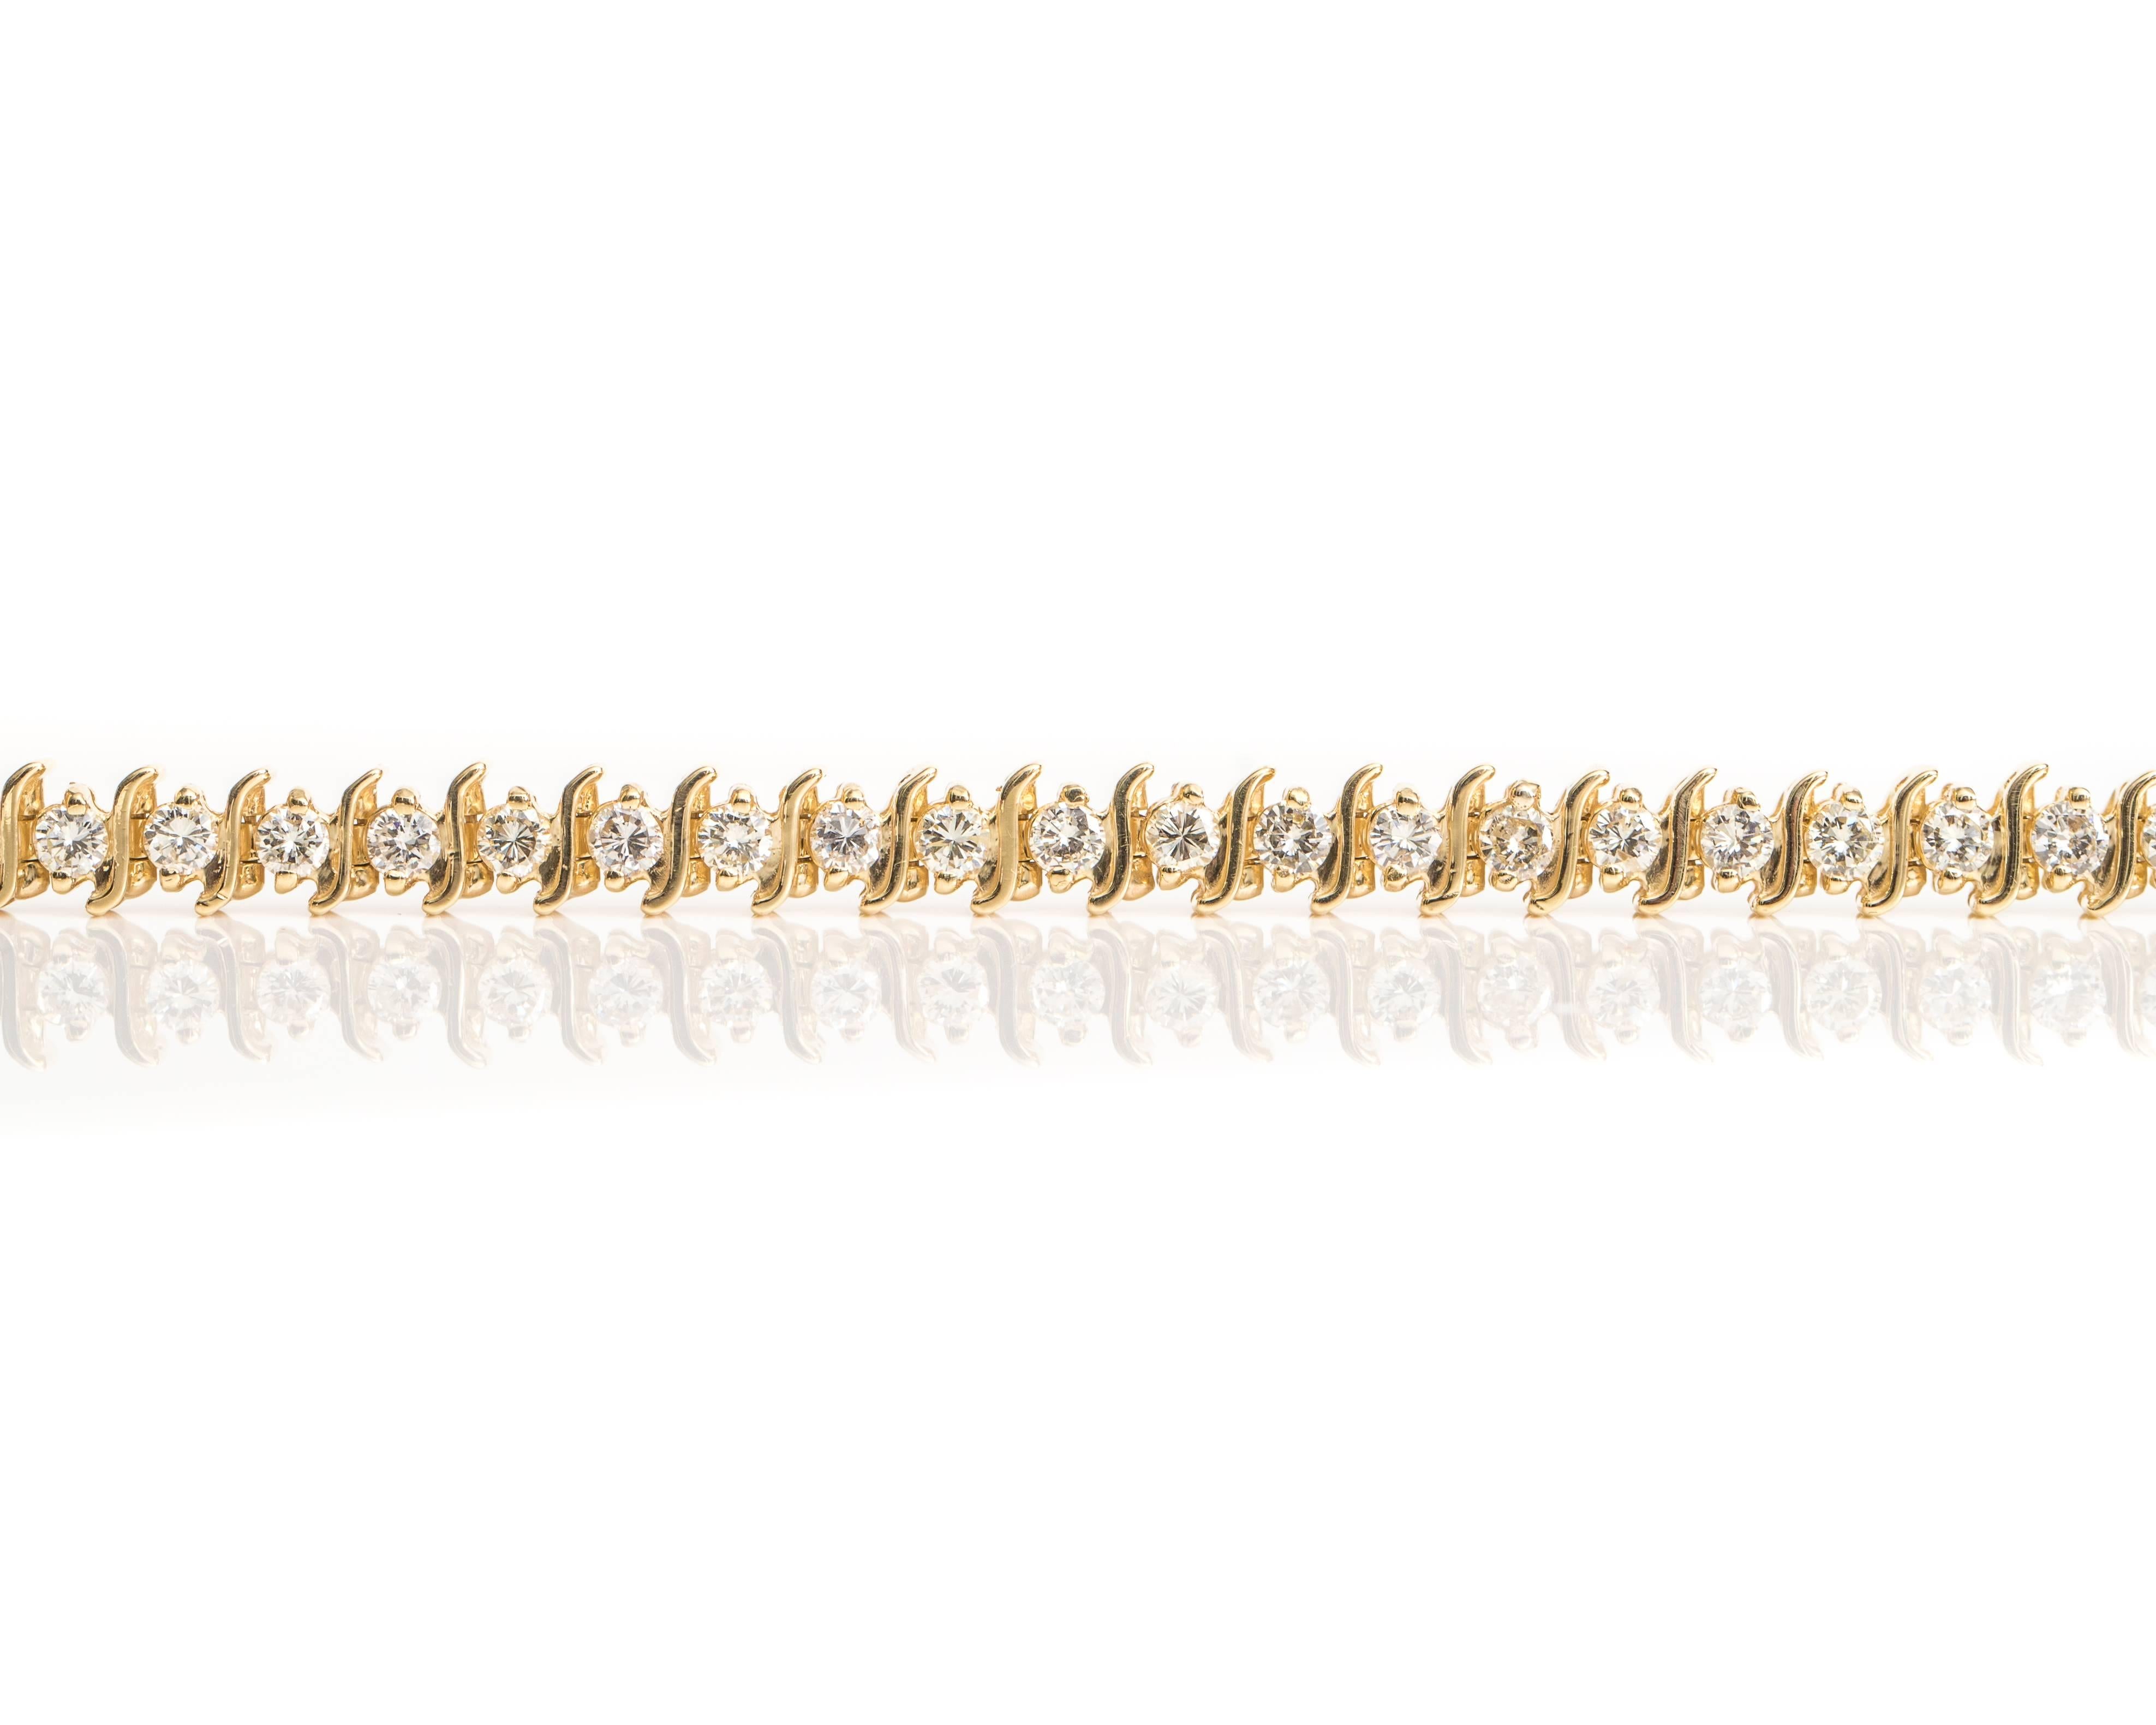 This stunning 1960s Retro S-Link Diamond Tennis Bracelet is a Luxury Classic. It features 6.0 Carats of Round Brilliant Diamonds set in 14 Karat Yellow Gold. The 14 Karat Yellow Gold S-Links separate each of the 35 Diamonds for optimal sparkle and